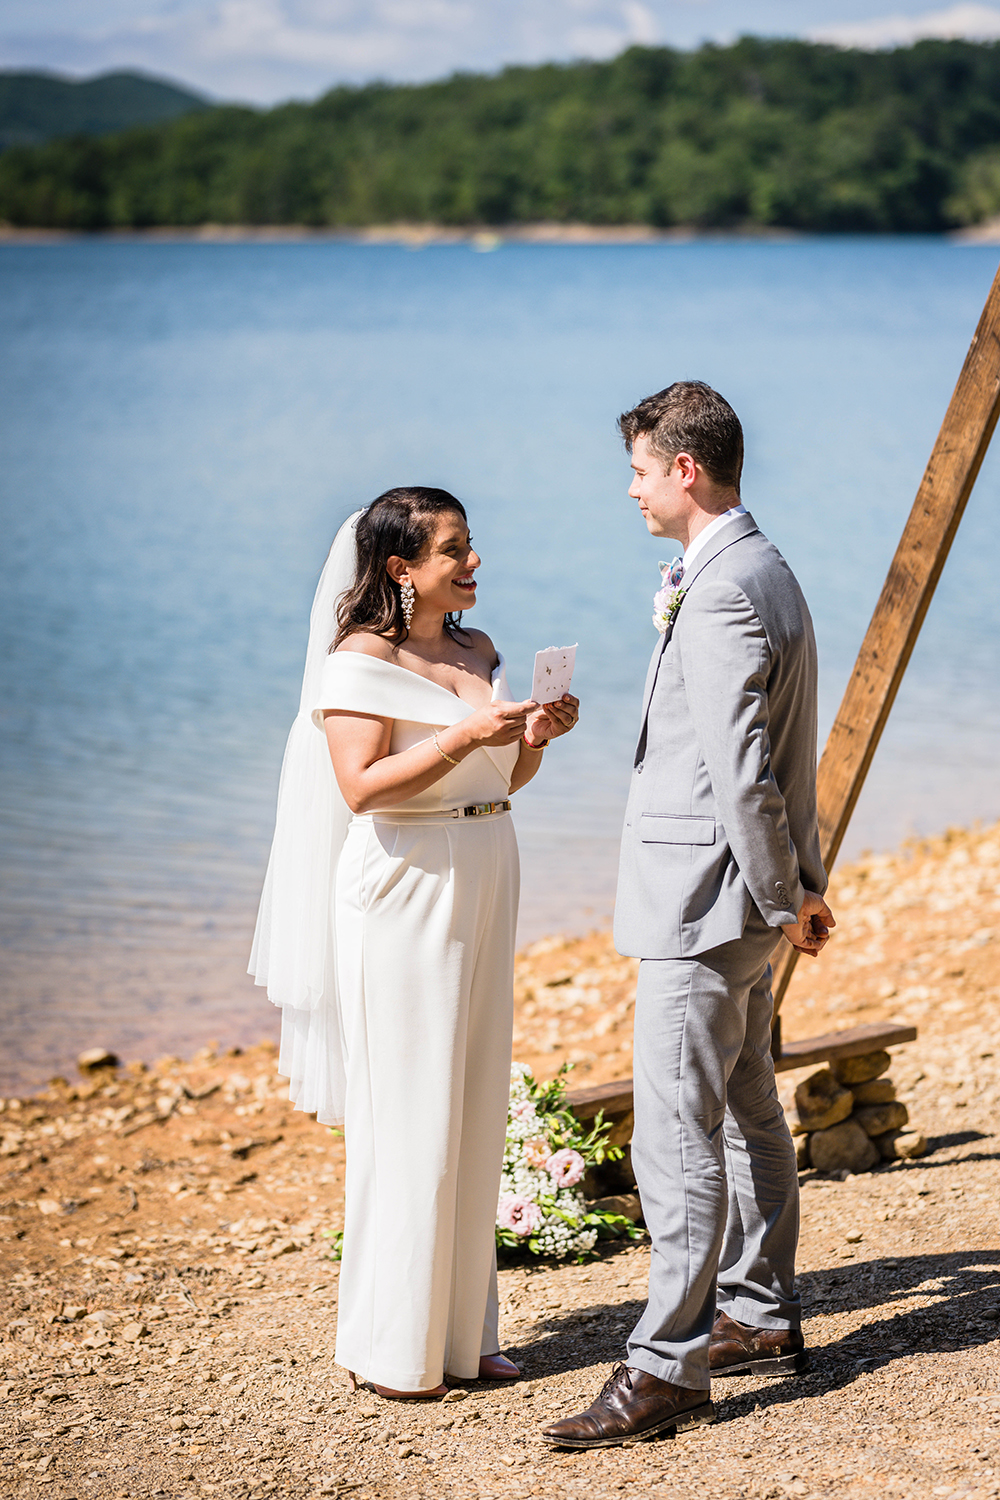 A couple read their vows to one another along the shores of Carvin's Cove in Roanoke, Virginia.